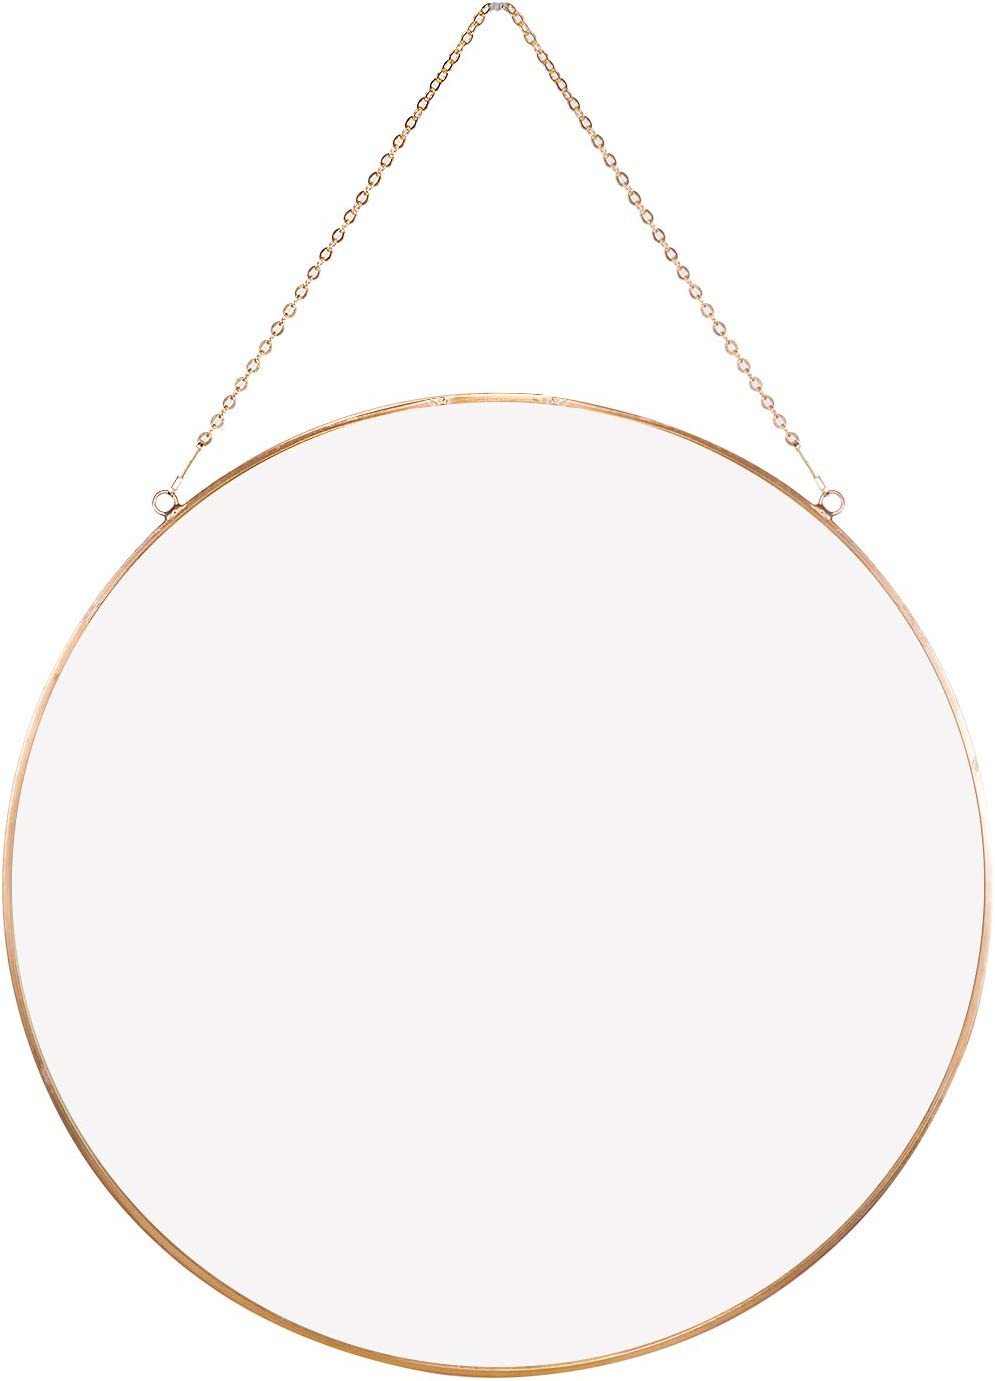 Primary image for Dahey Hanging Circle Mirror Wall Decor Small Gold Round Mirror With, Gold.